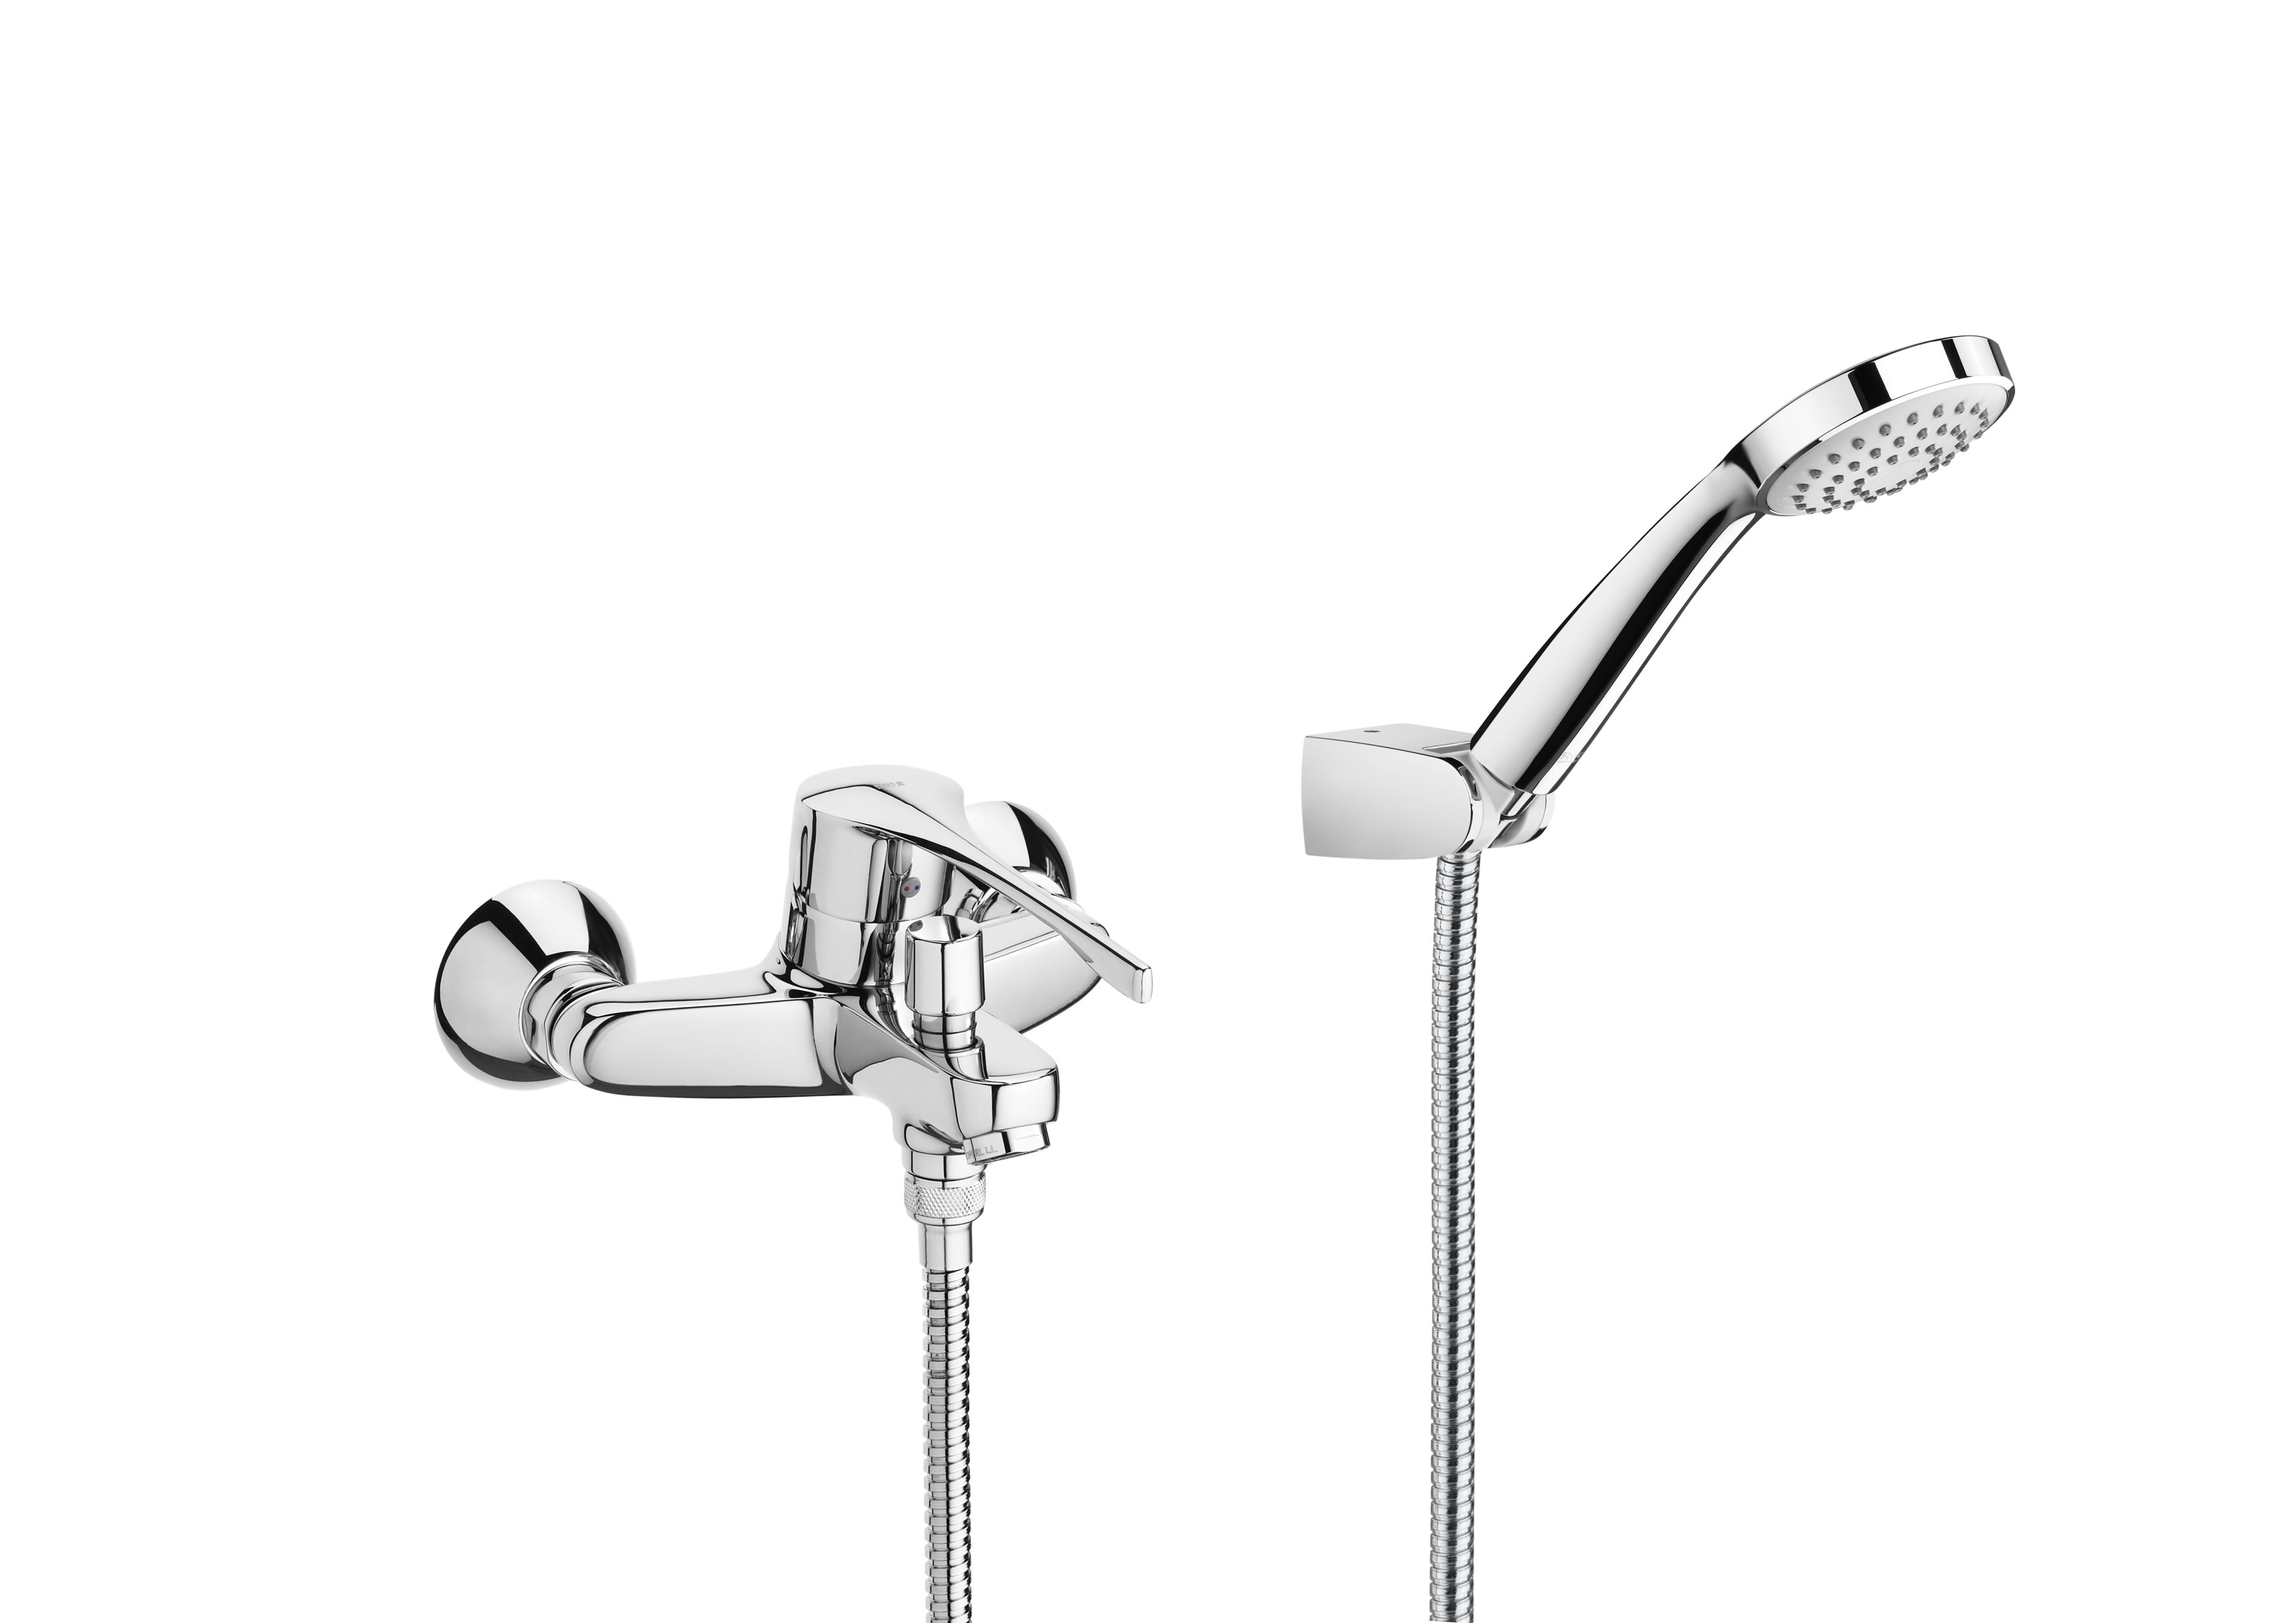 RO - Wall-mounted bath-shower mixer with automatic diverter, han